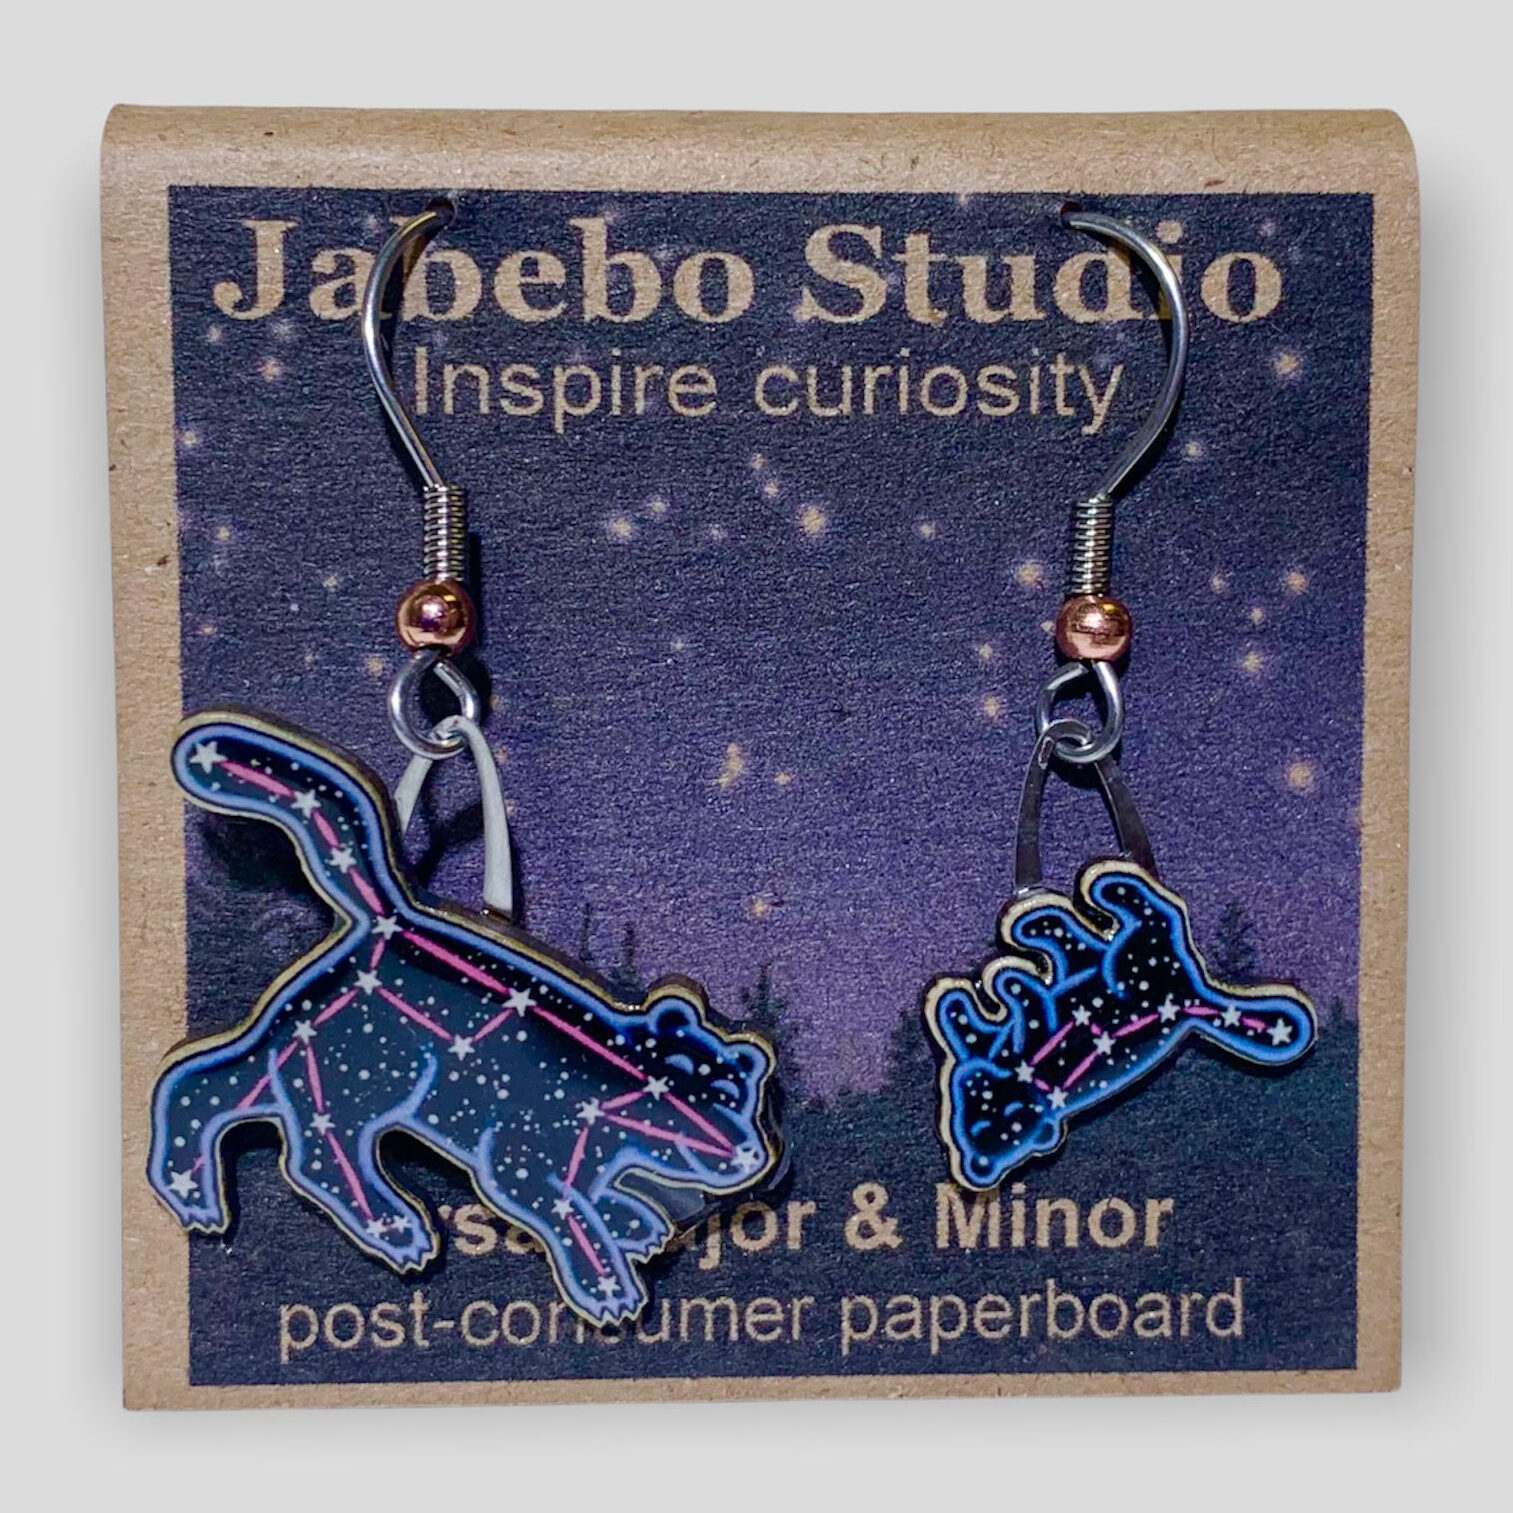 Picture shown is of 1 inch tall pair of earrings of Ursa Major & Minor.